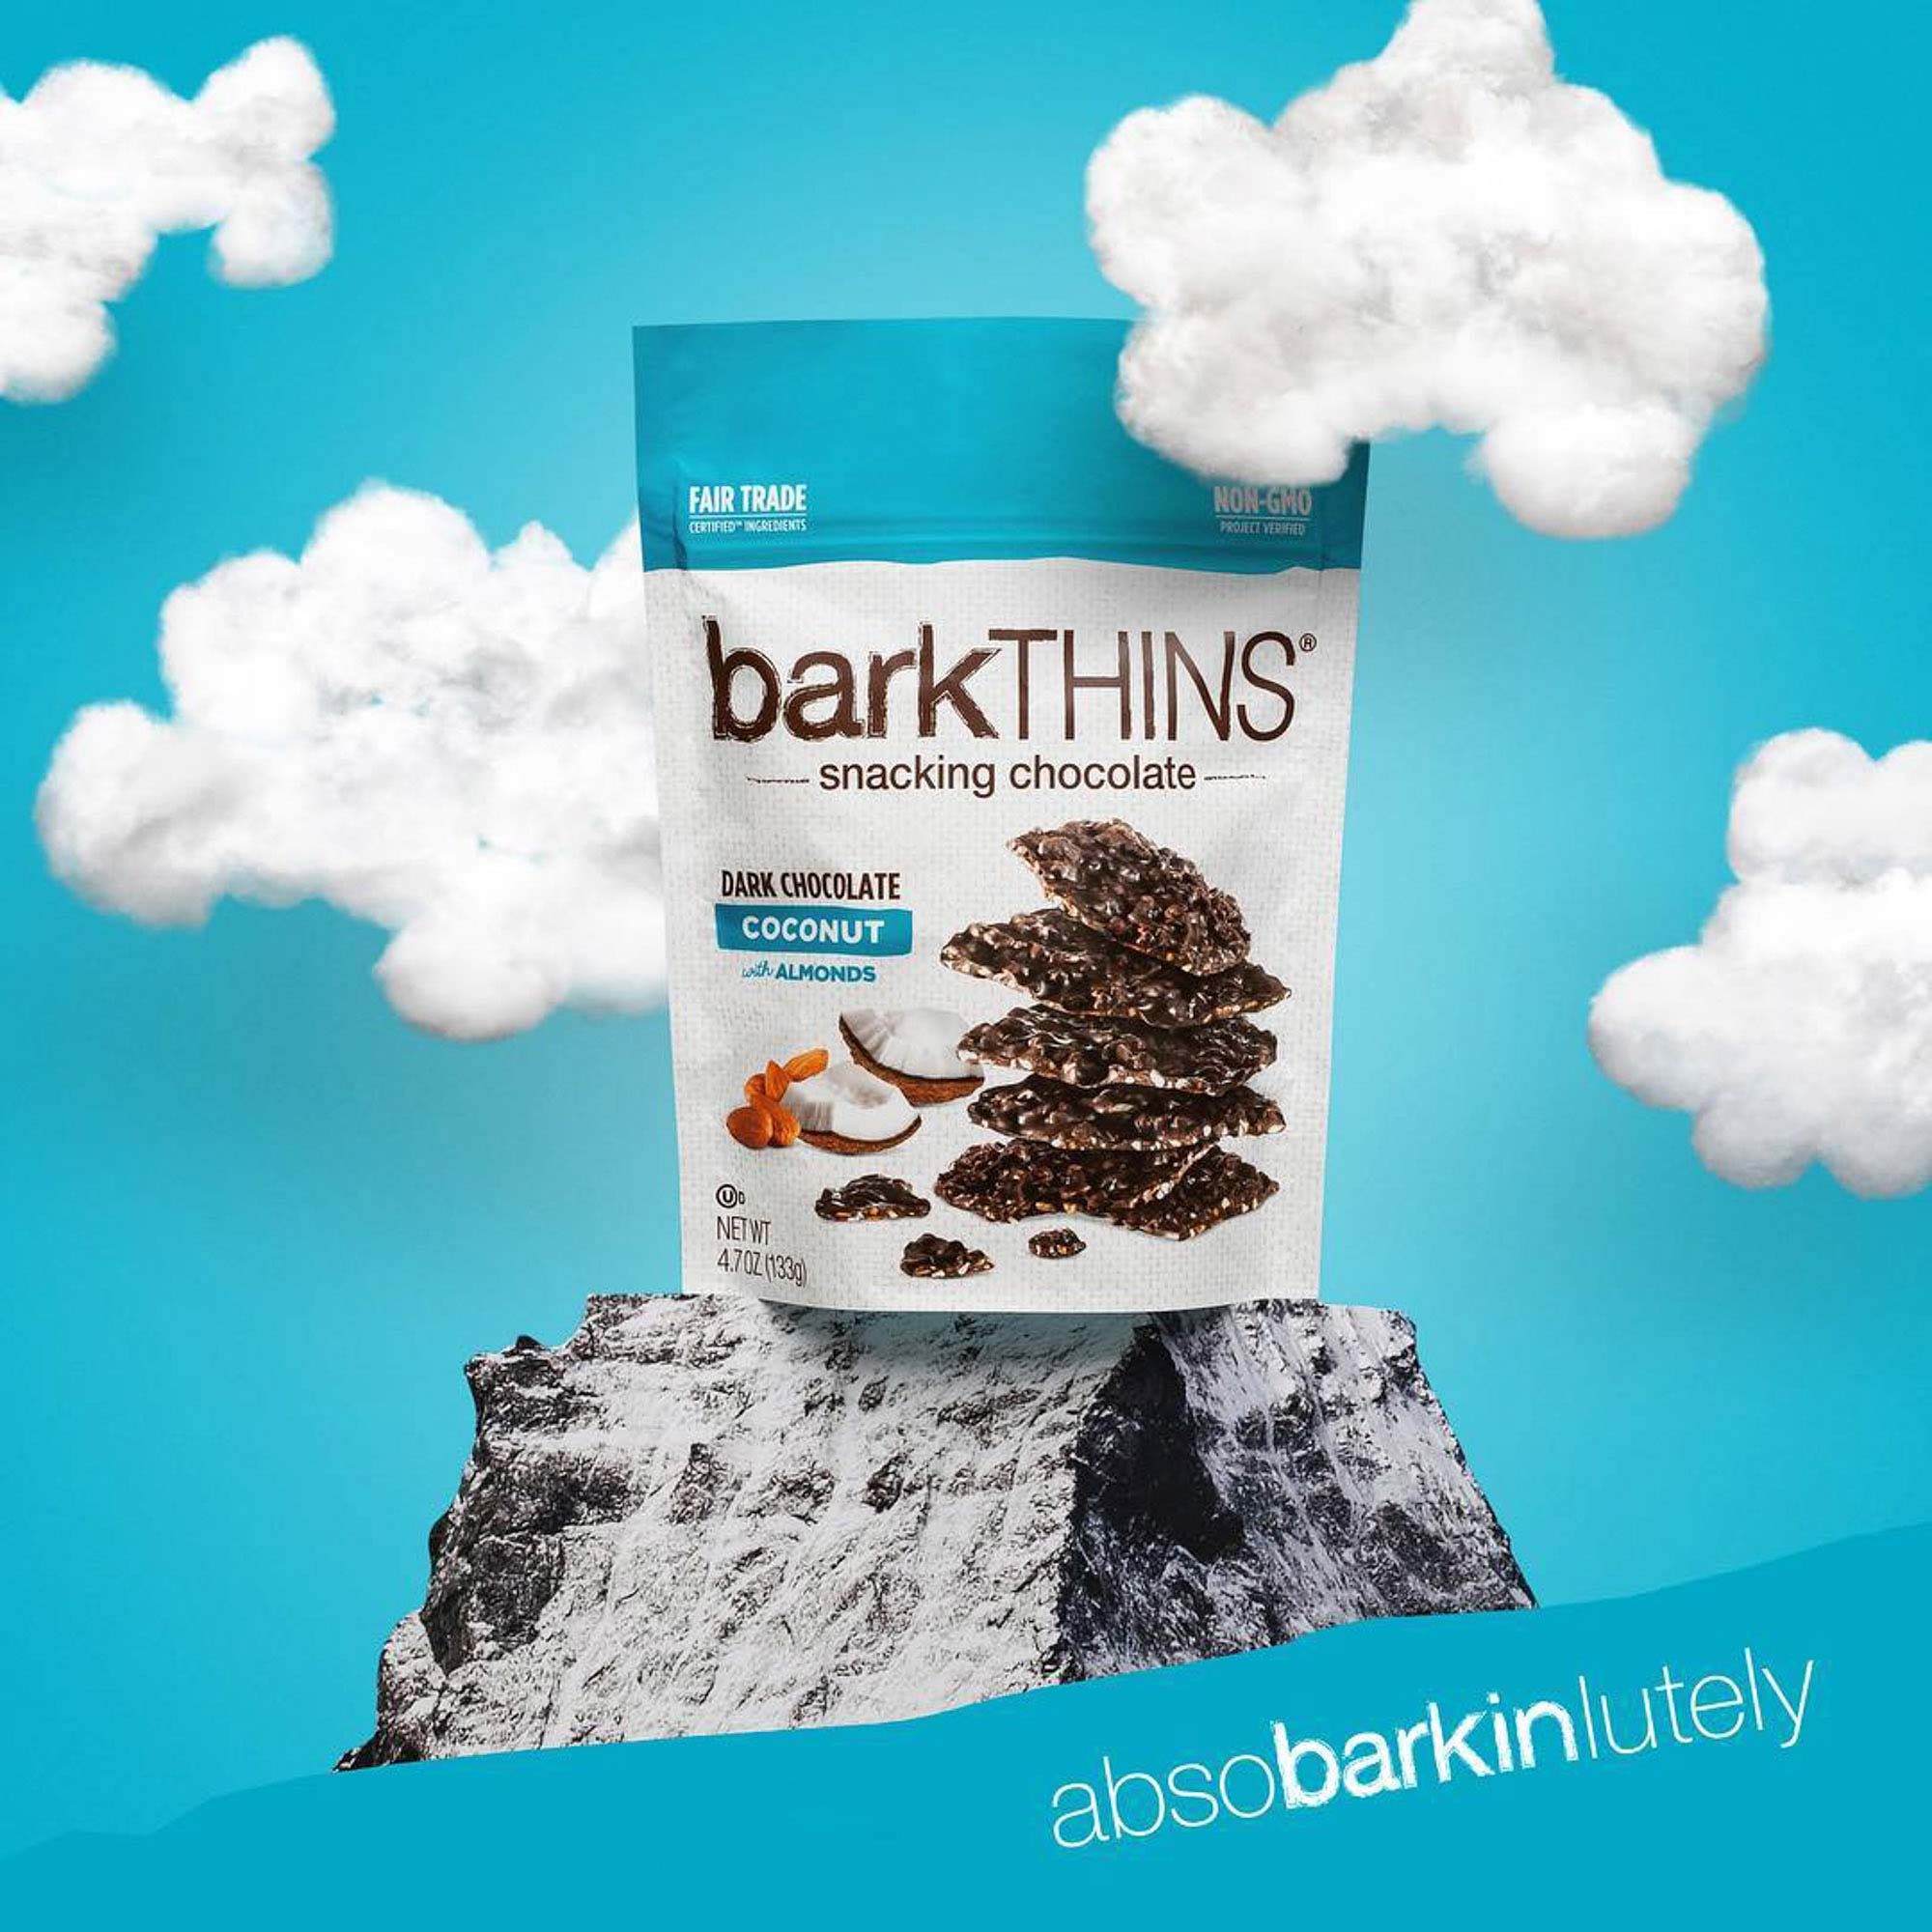 Barkthins coconut dark chocolate bag on top of mountain with cotton clouds, product photography | Still Life Photography shot in Boulder, Colorado for Crispin Porter + Bogusky